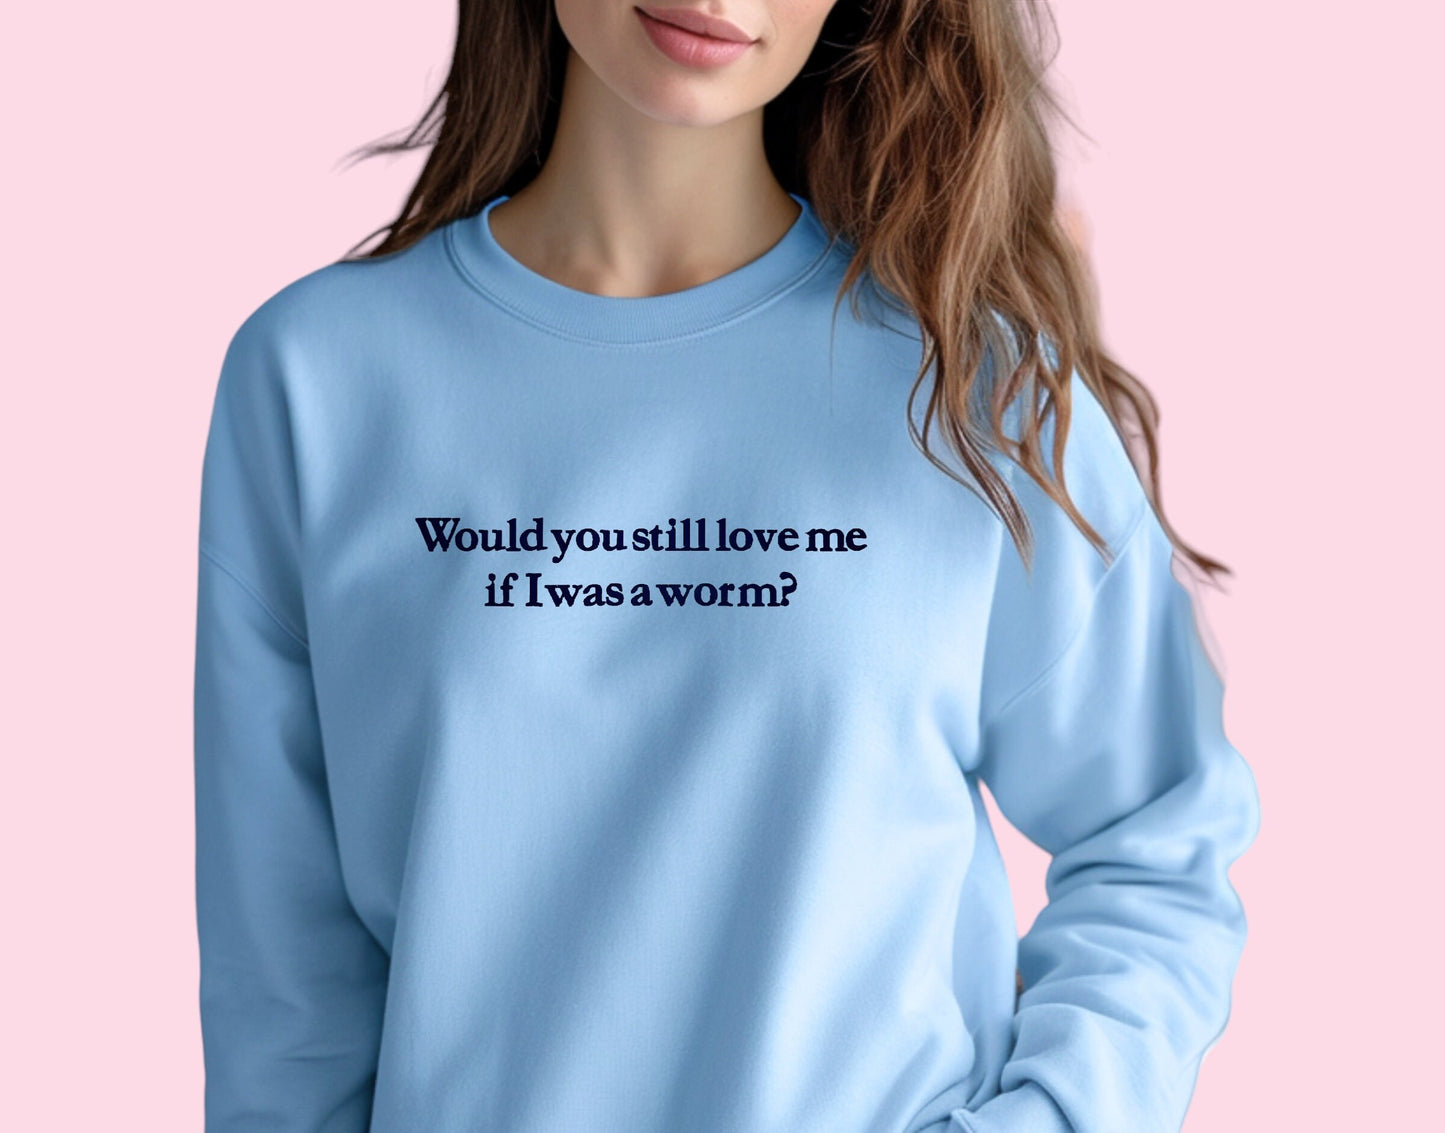 a woman wearing a blue sweatshirt that says would you still love me if i was